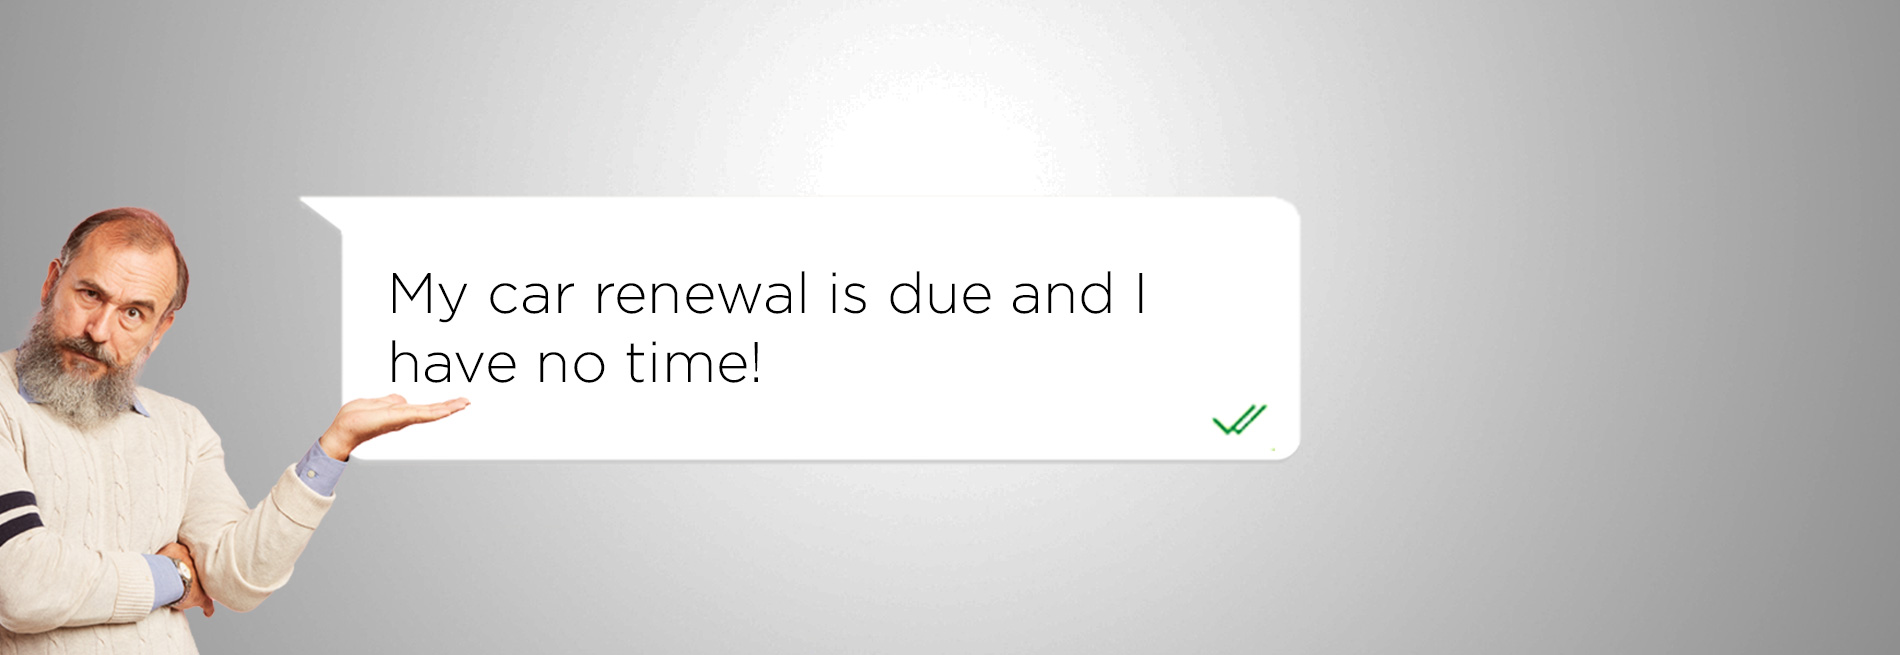 My Car renewal is due and i have no time